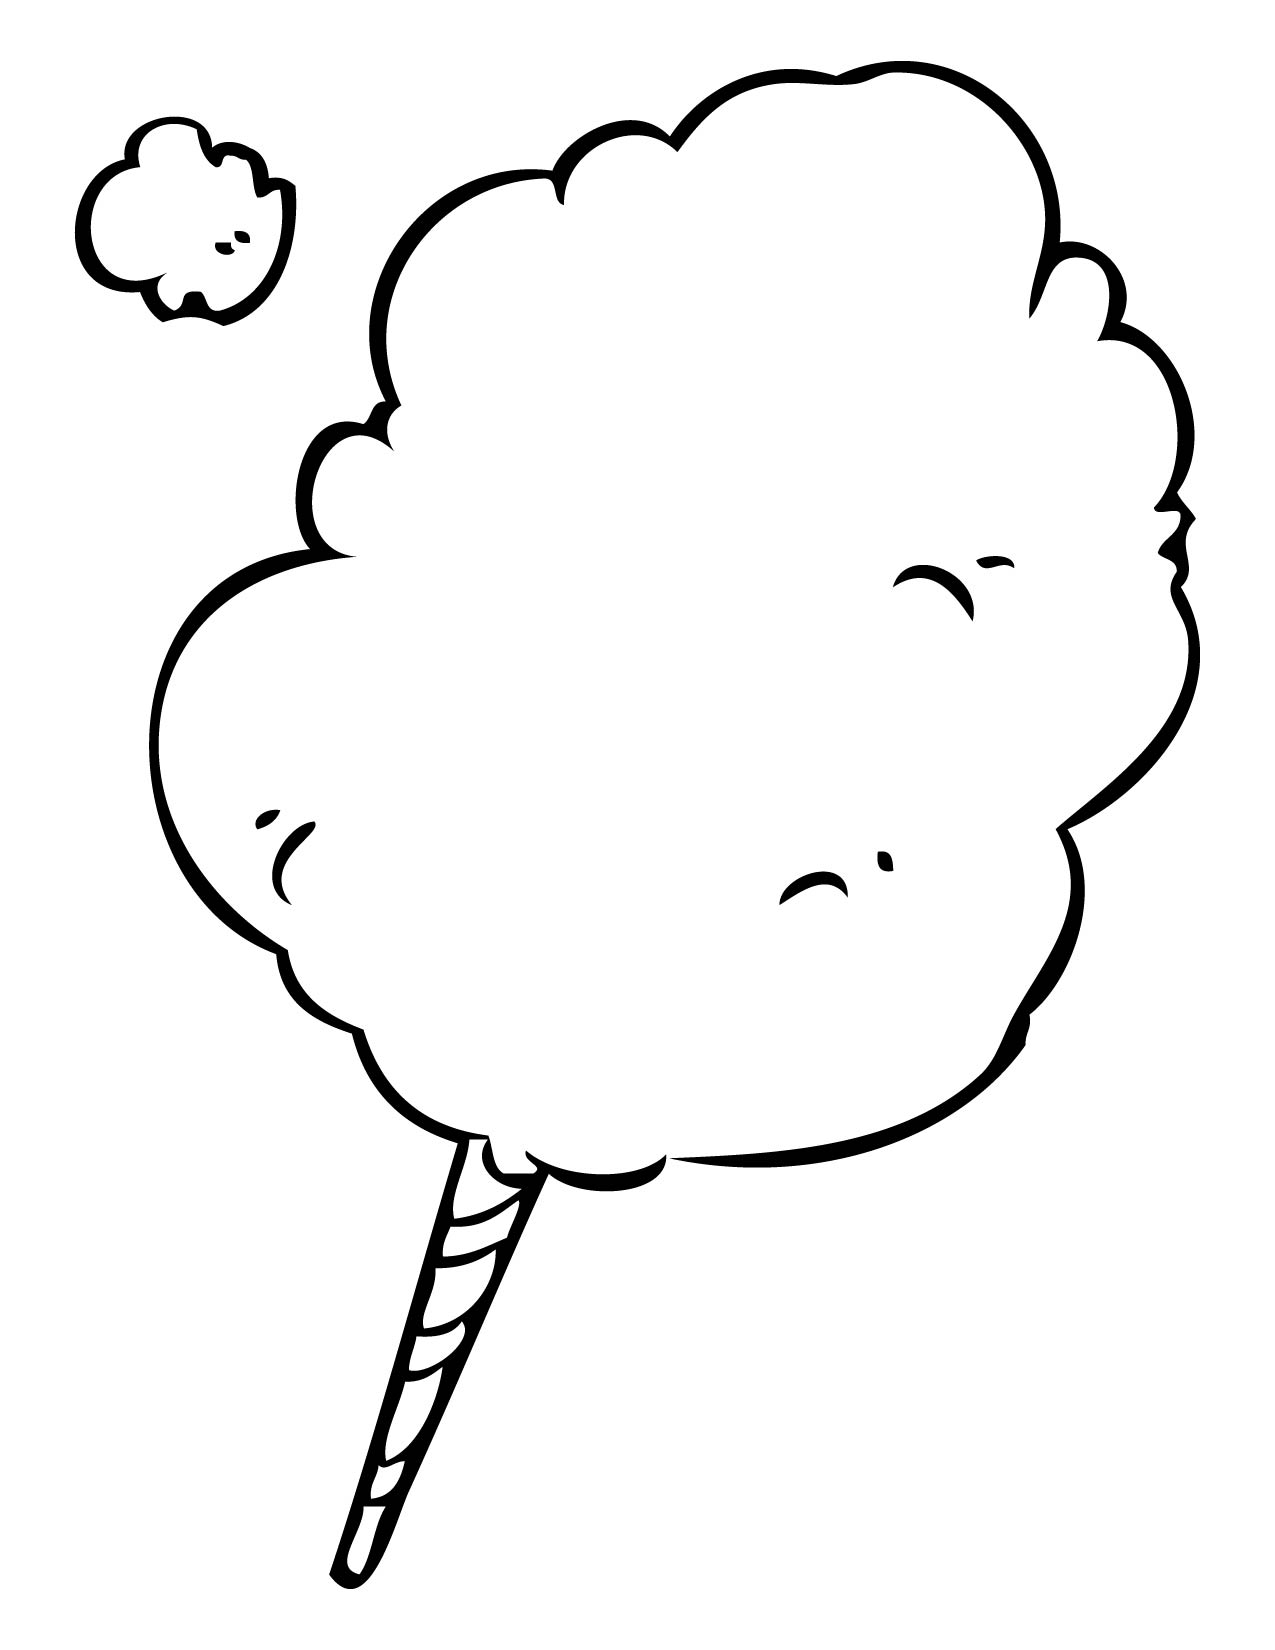 cotton candy clipart black and white